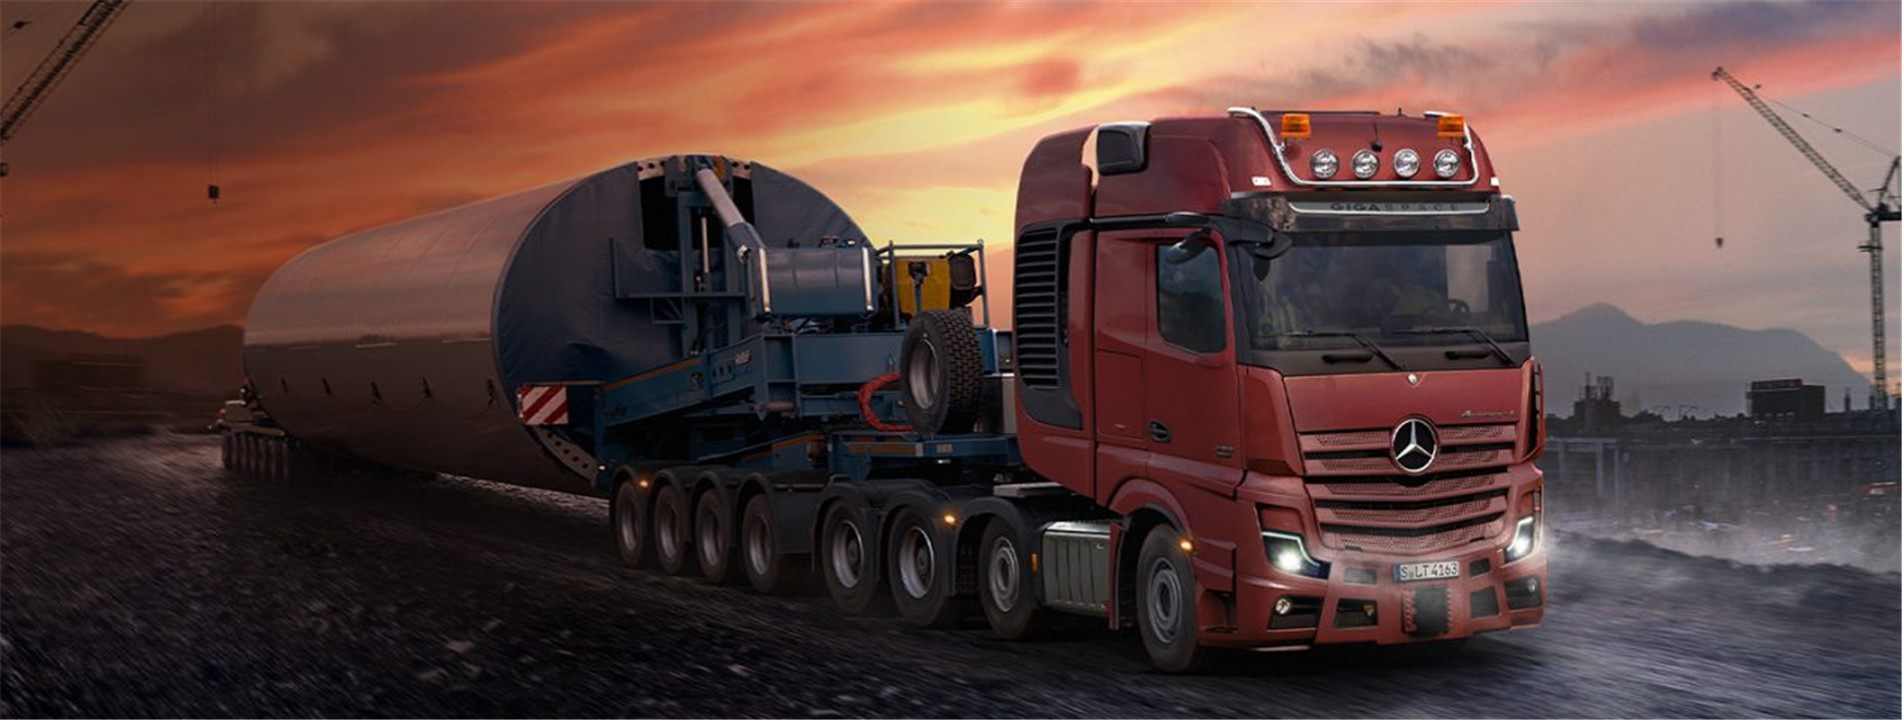 The Actros SLT